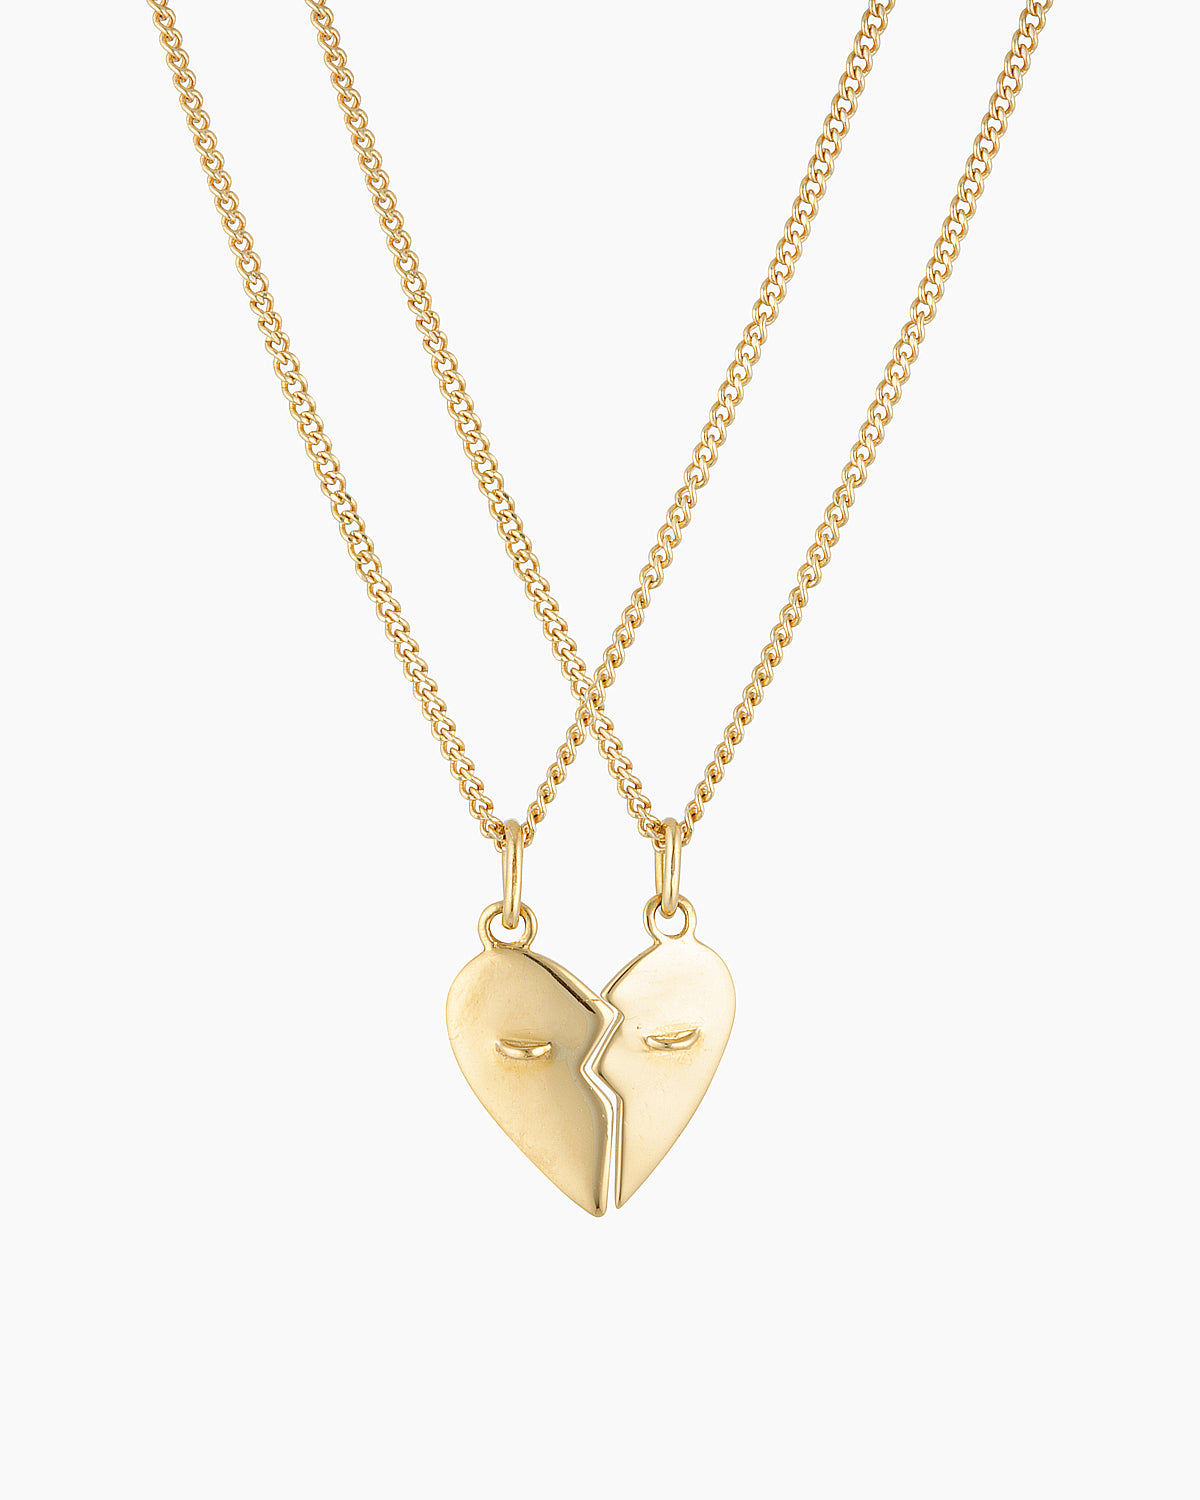 Best Friend Duo Set Necklaces: Meaningful and Heartfelt Jewelry